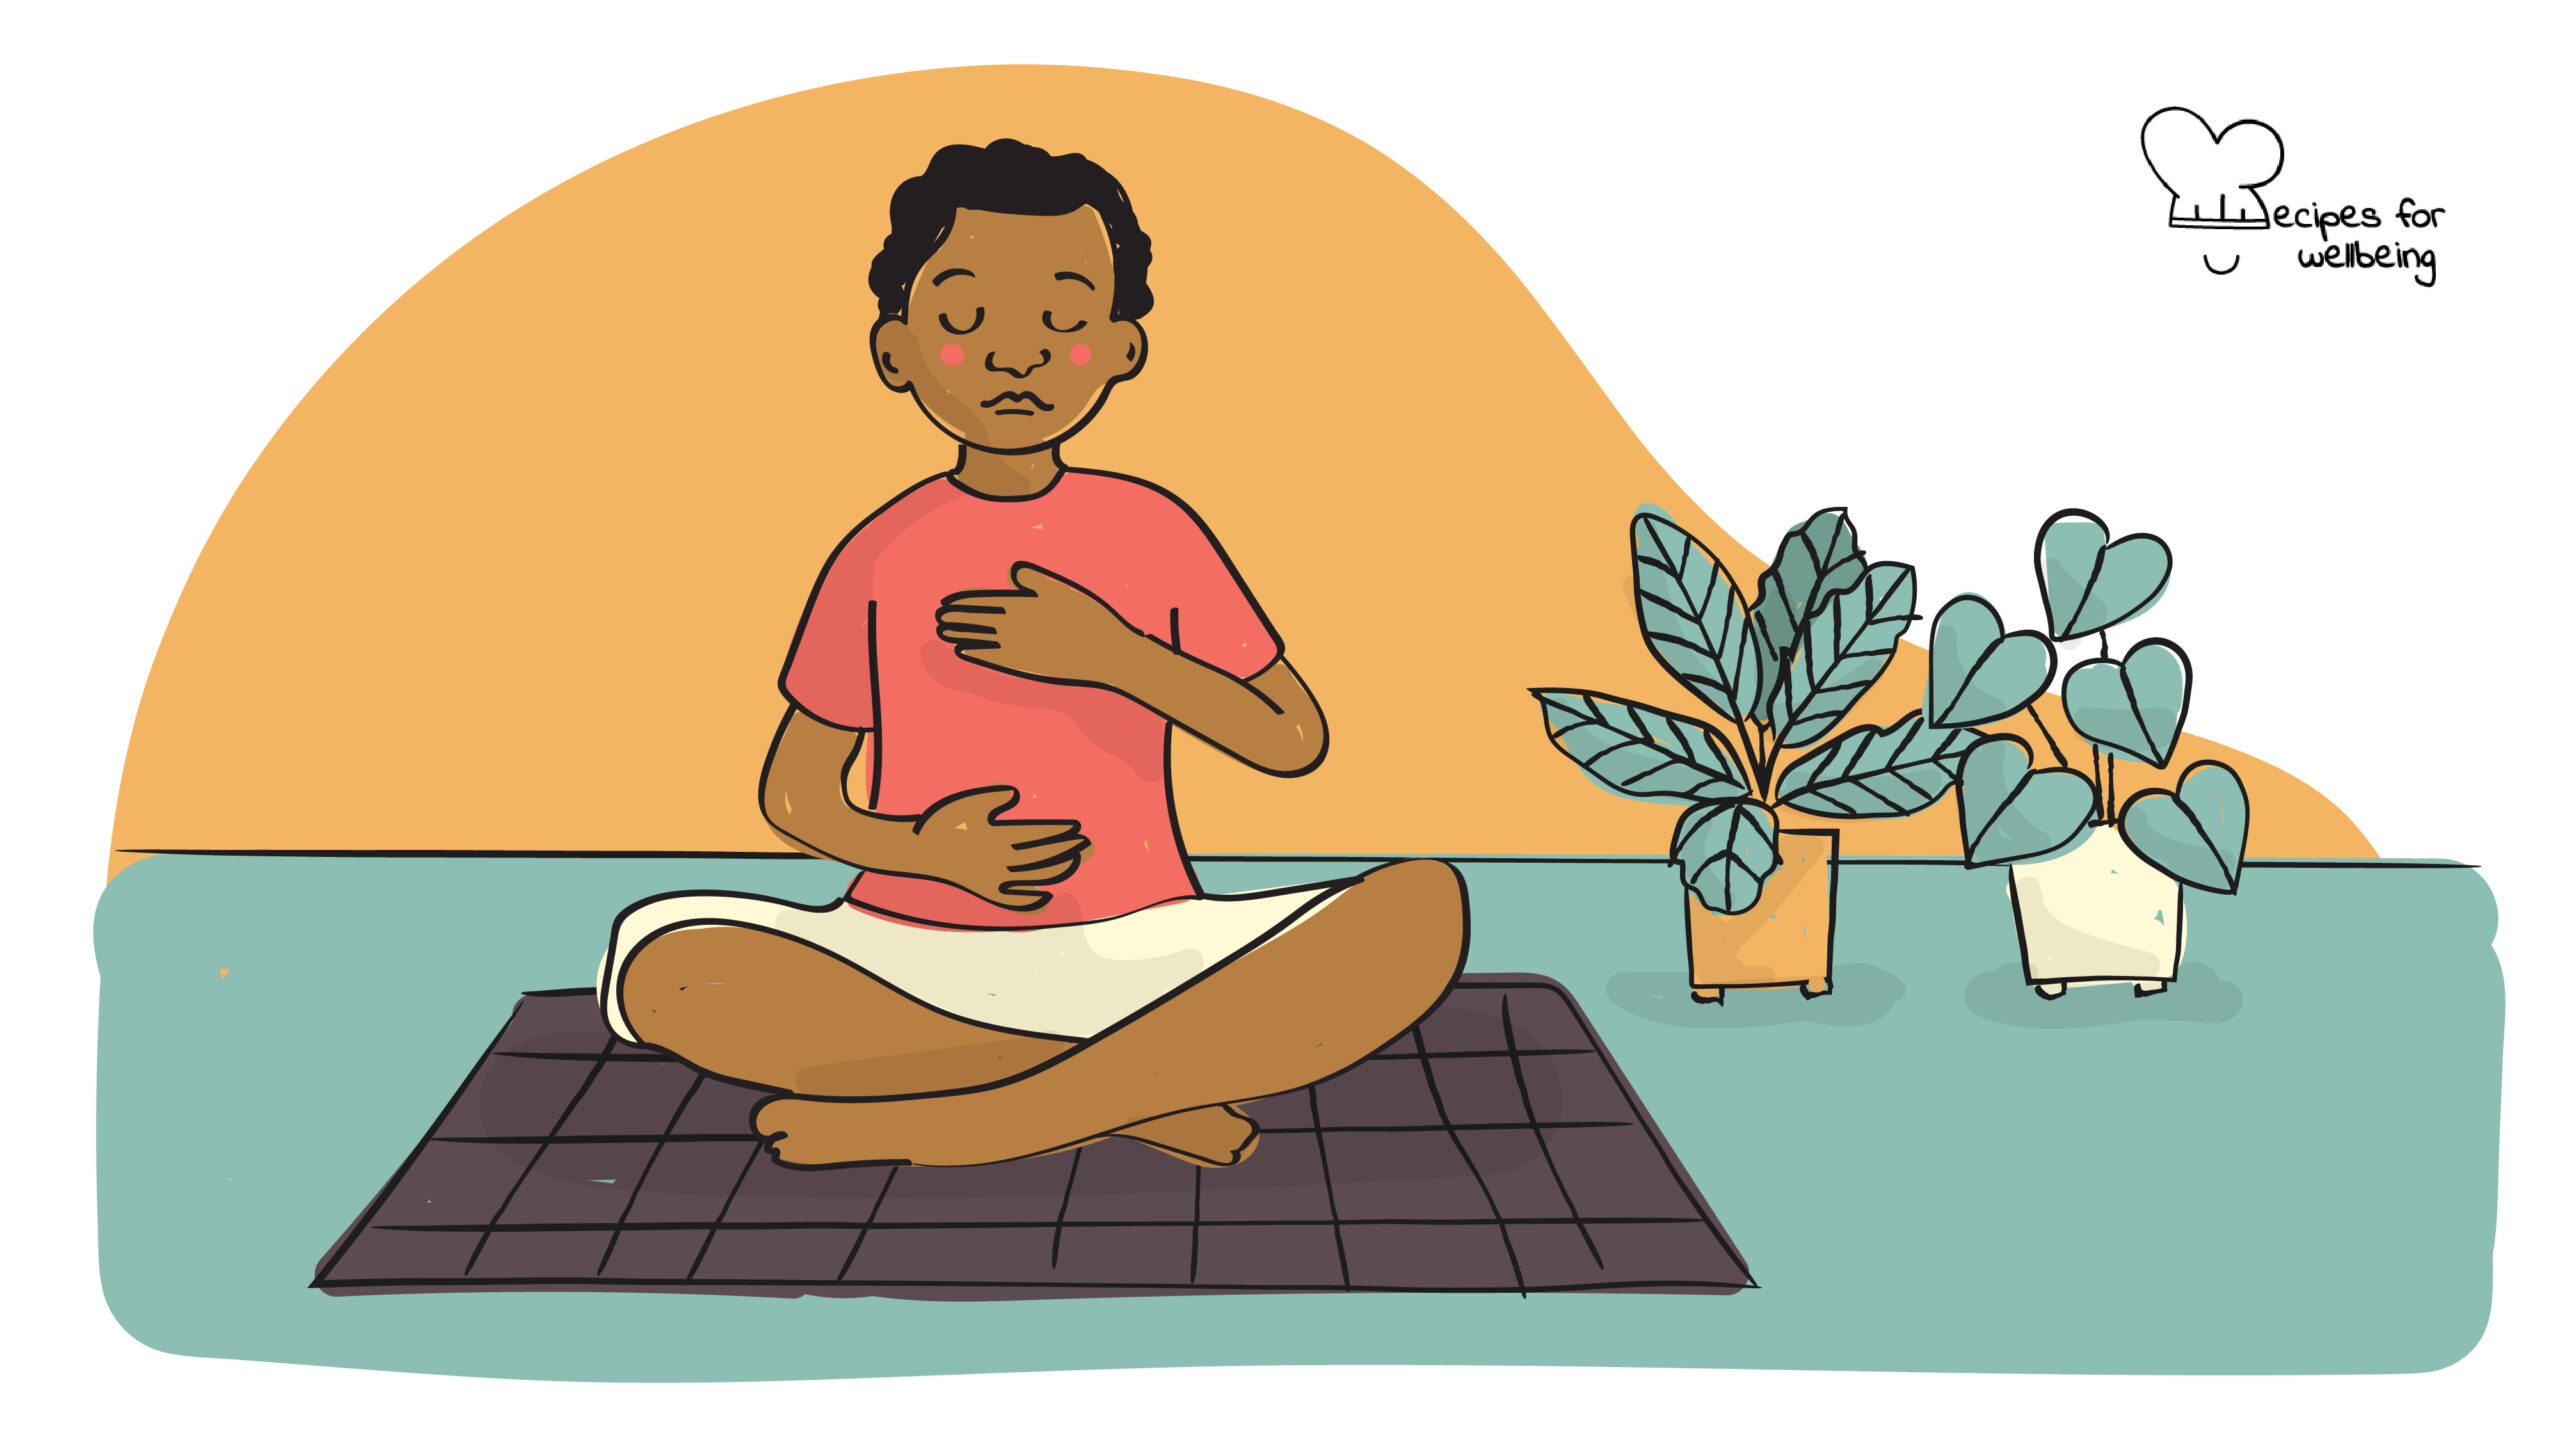 Illustration of a person sitting cross-legged with one hand resting on the chest and the other on the belly to feel the rising and falling sensations of the breath. © Recipes for Wellbeing